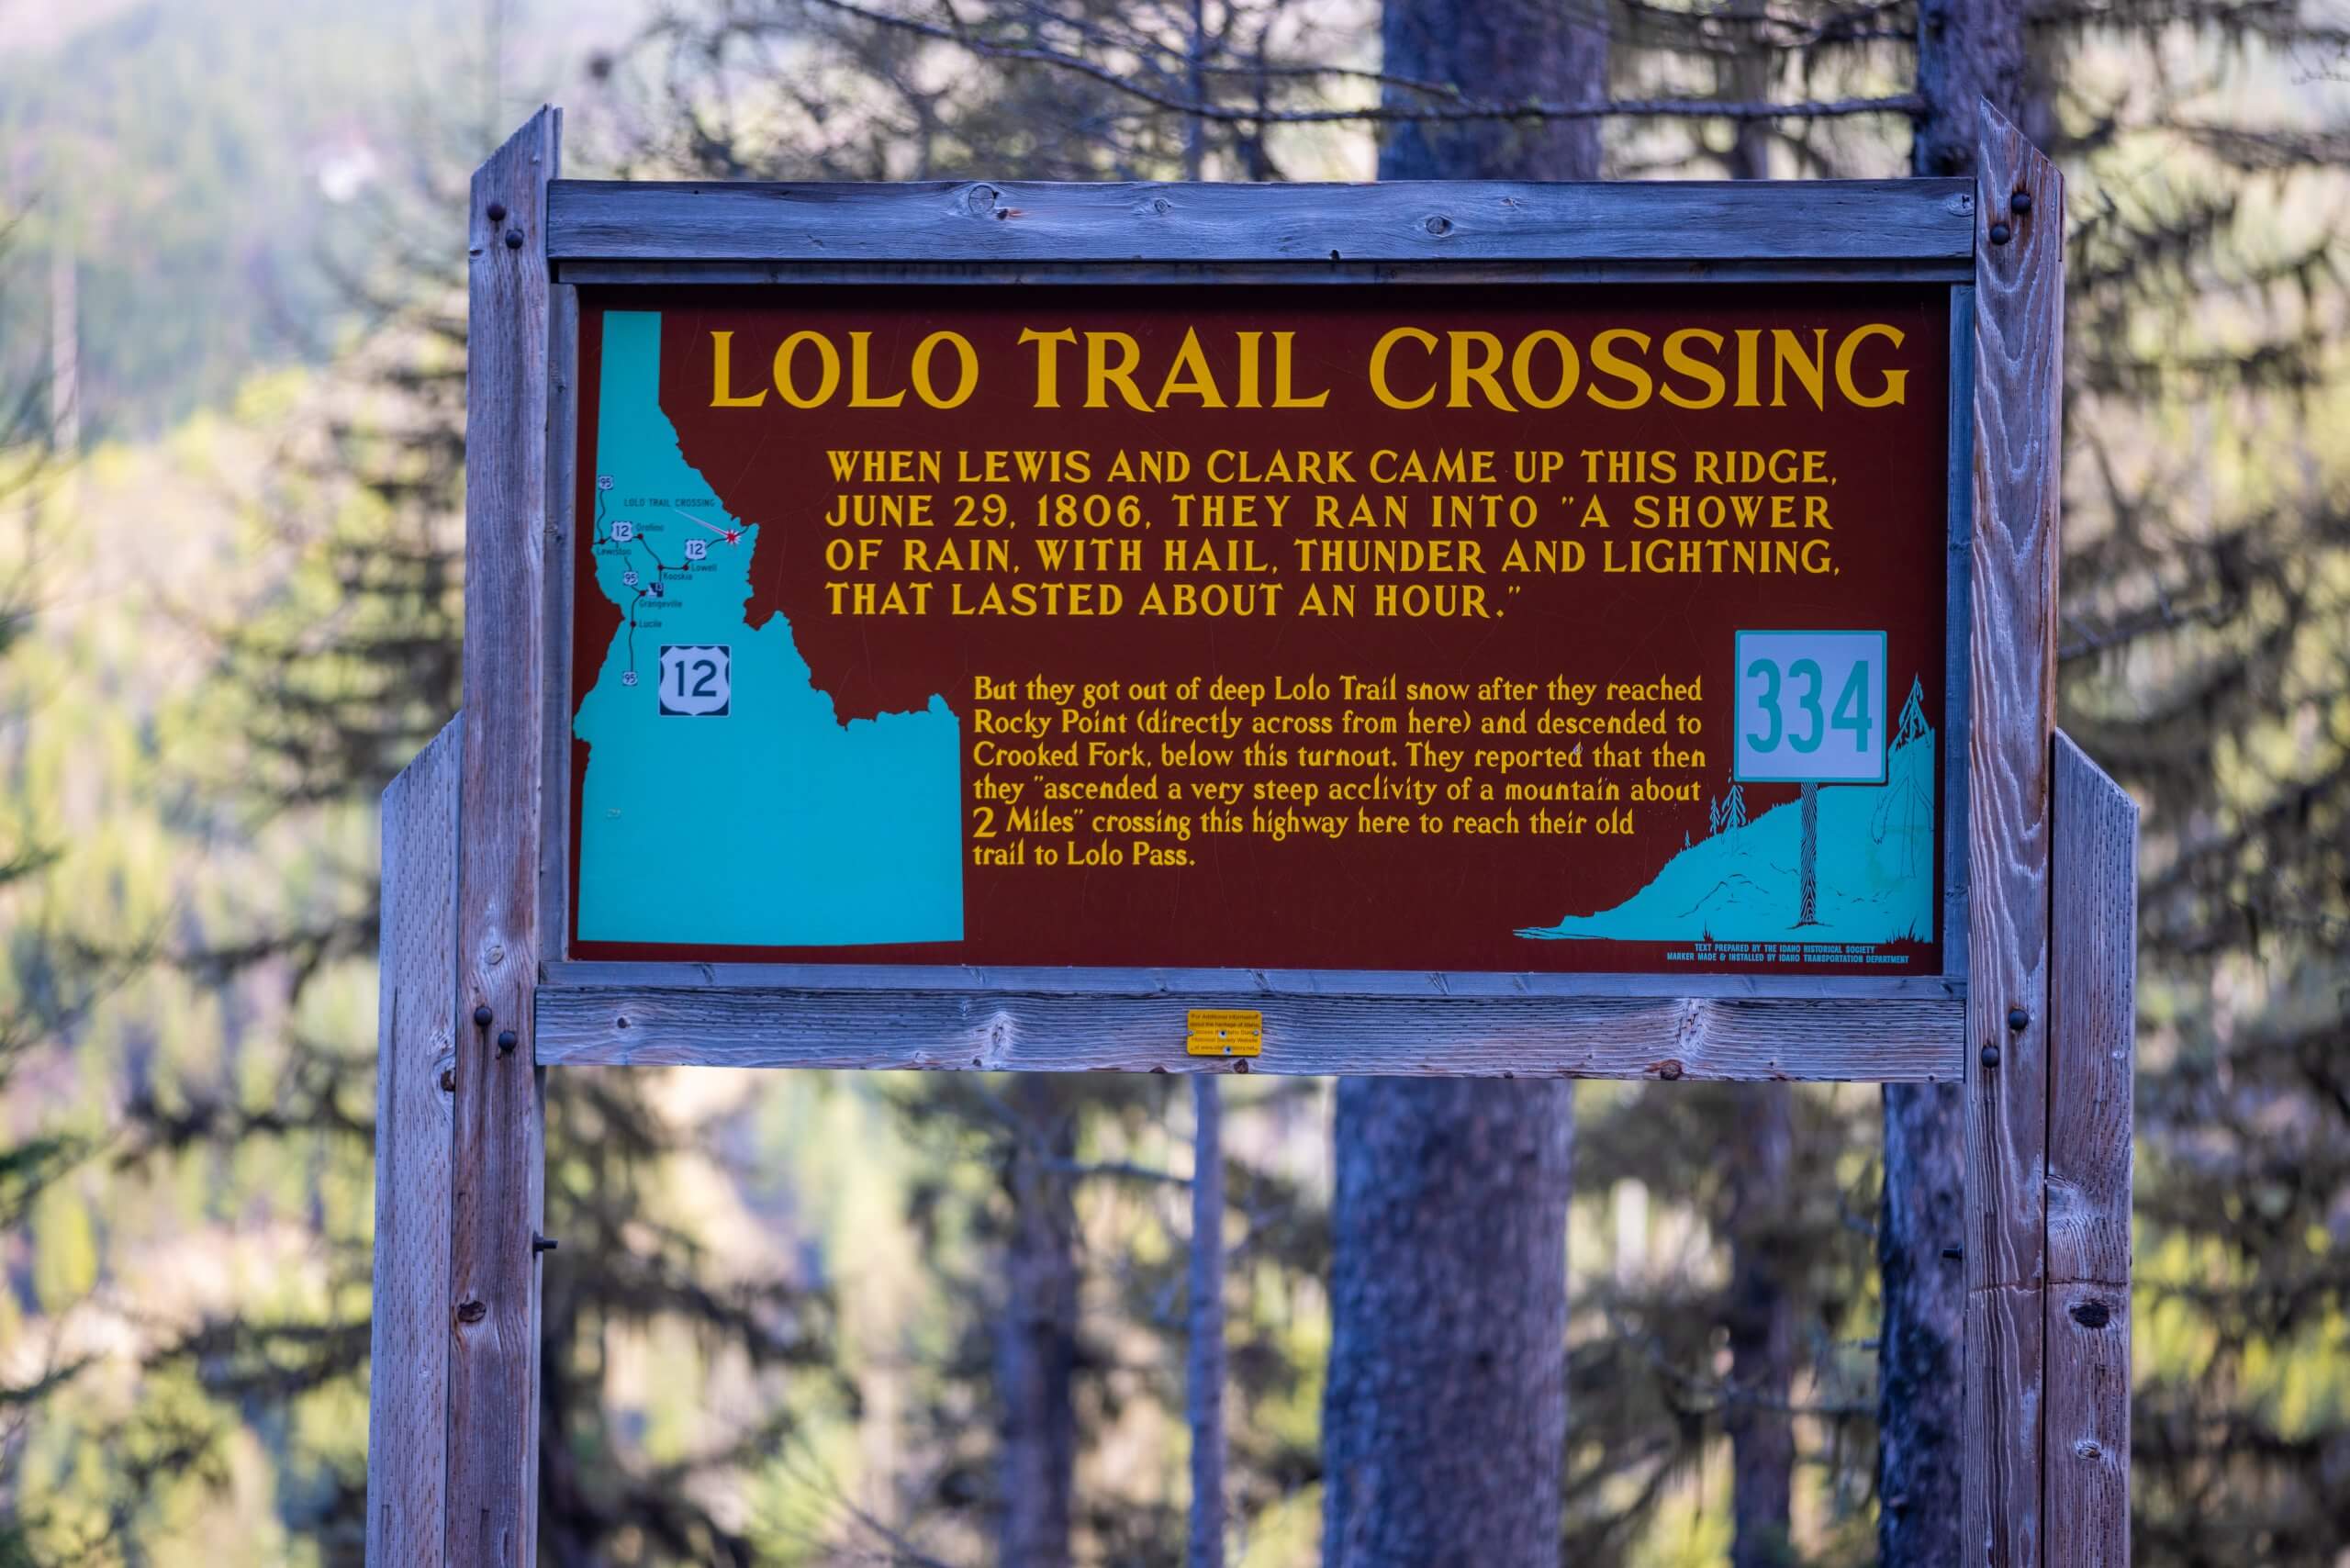 A roadside sign for Lolo Trail Crossing.